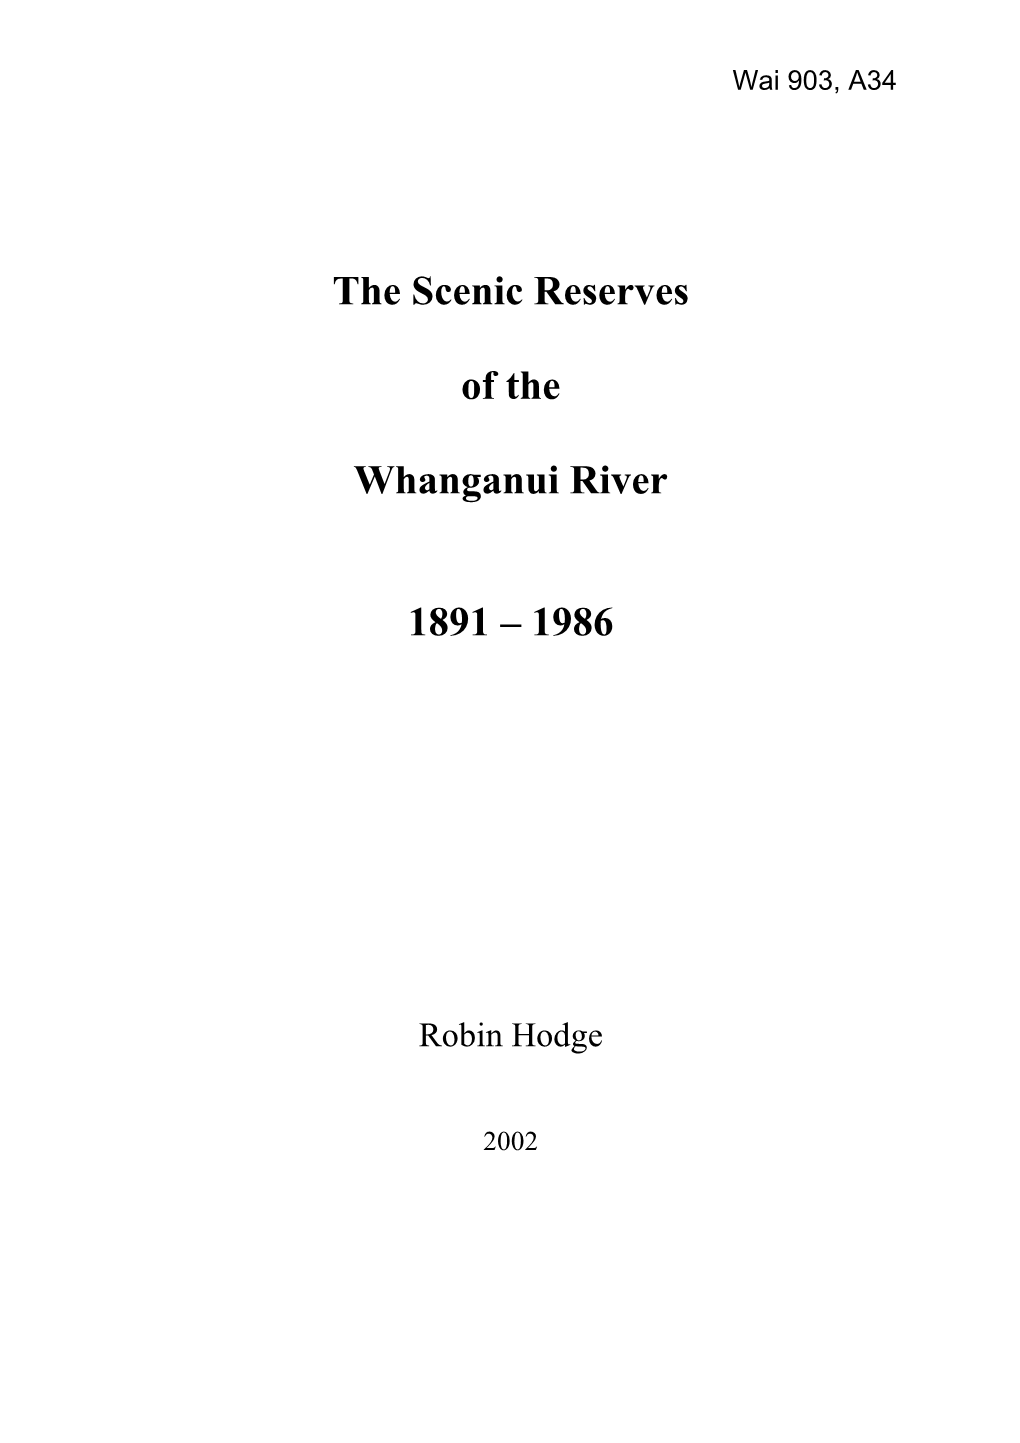 The Scenic Reserves of the Whanganui River 1891 – 1986